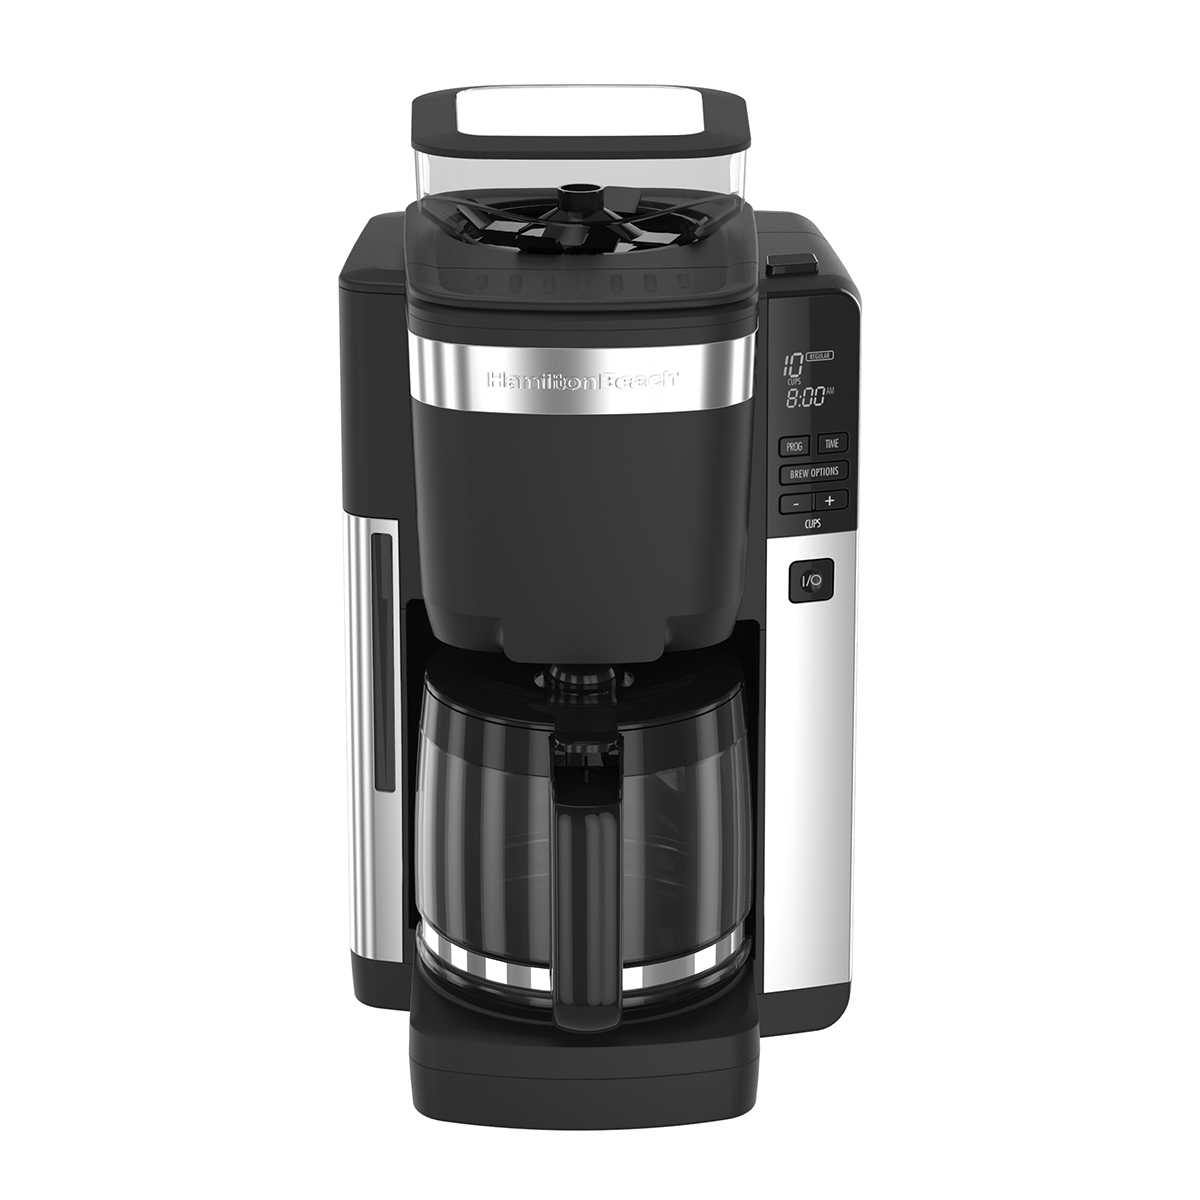 12 Cup Programmable Coffee Maker with Automatic Grounds Dispenser (45400)